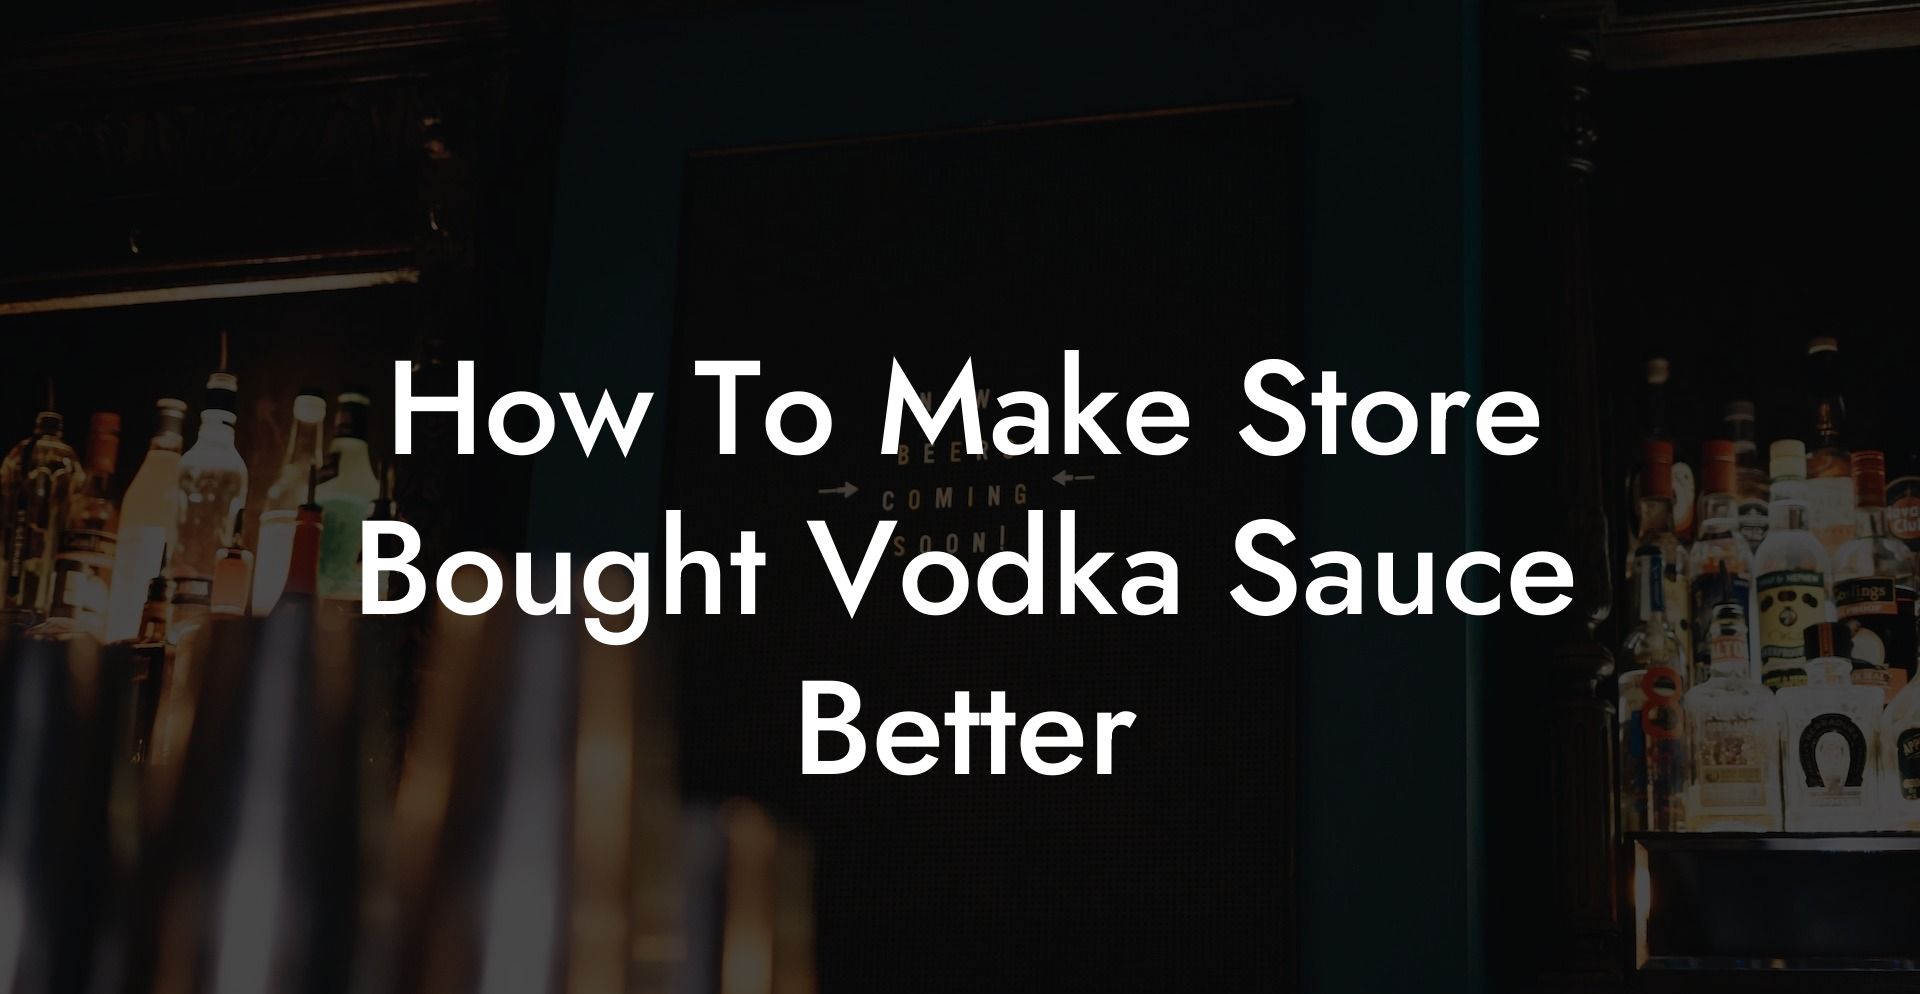 How To Make Store Bought Vodka Sauce Better